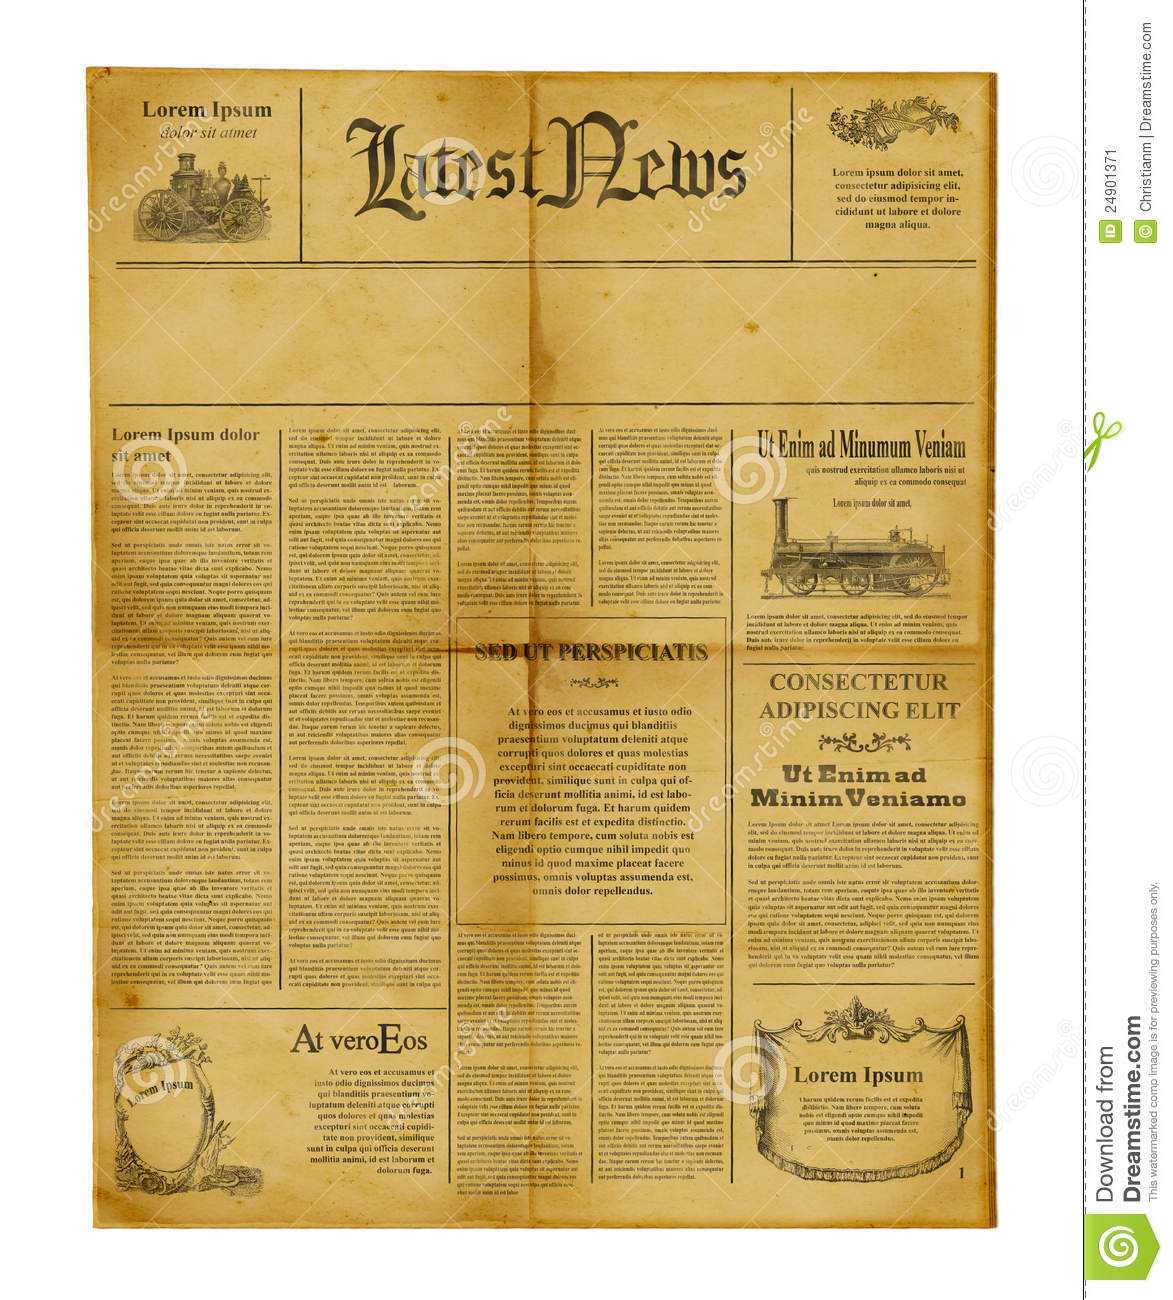 Antique Newspaper Template Stock Image. Image Of News – 24901371 With Blank Old Newspaper Template